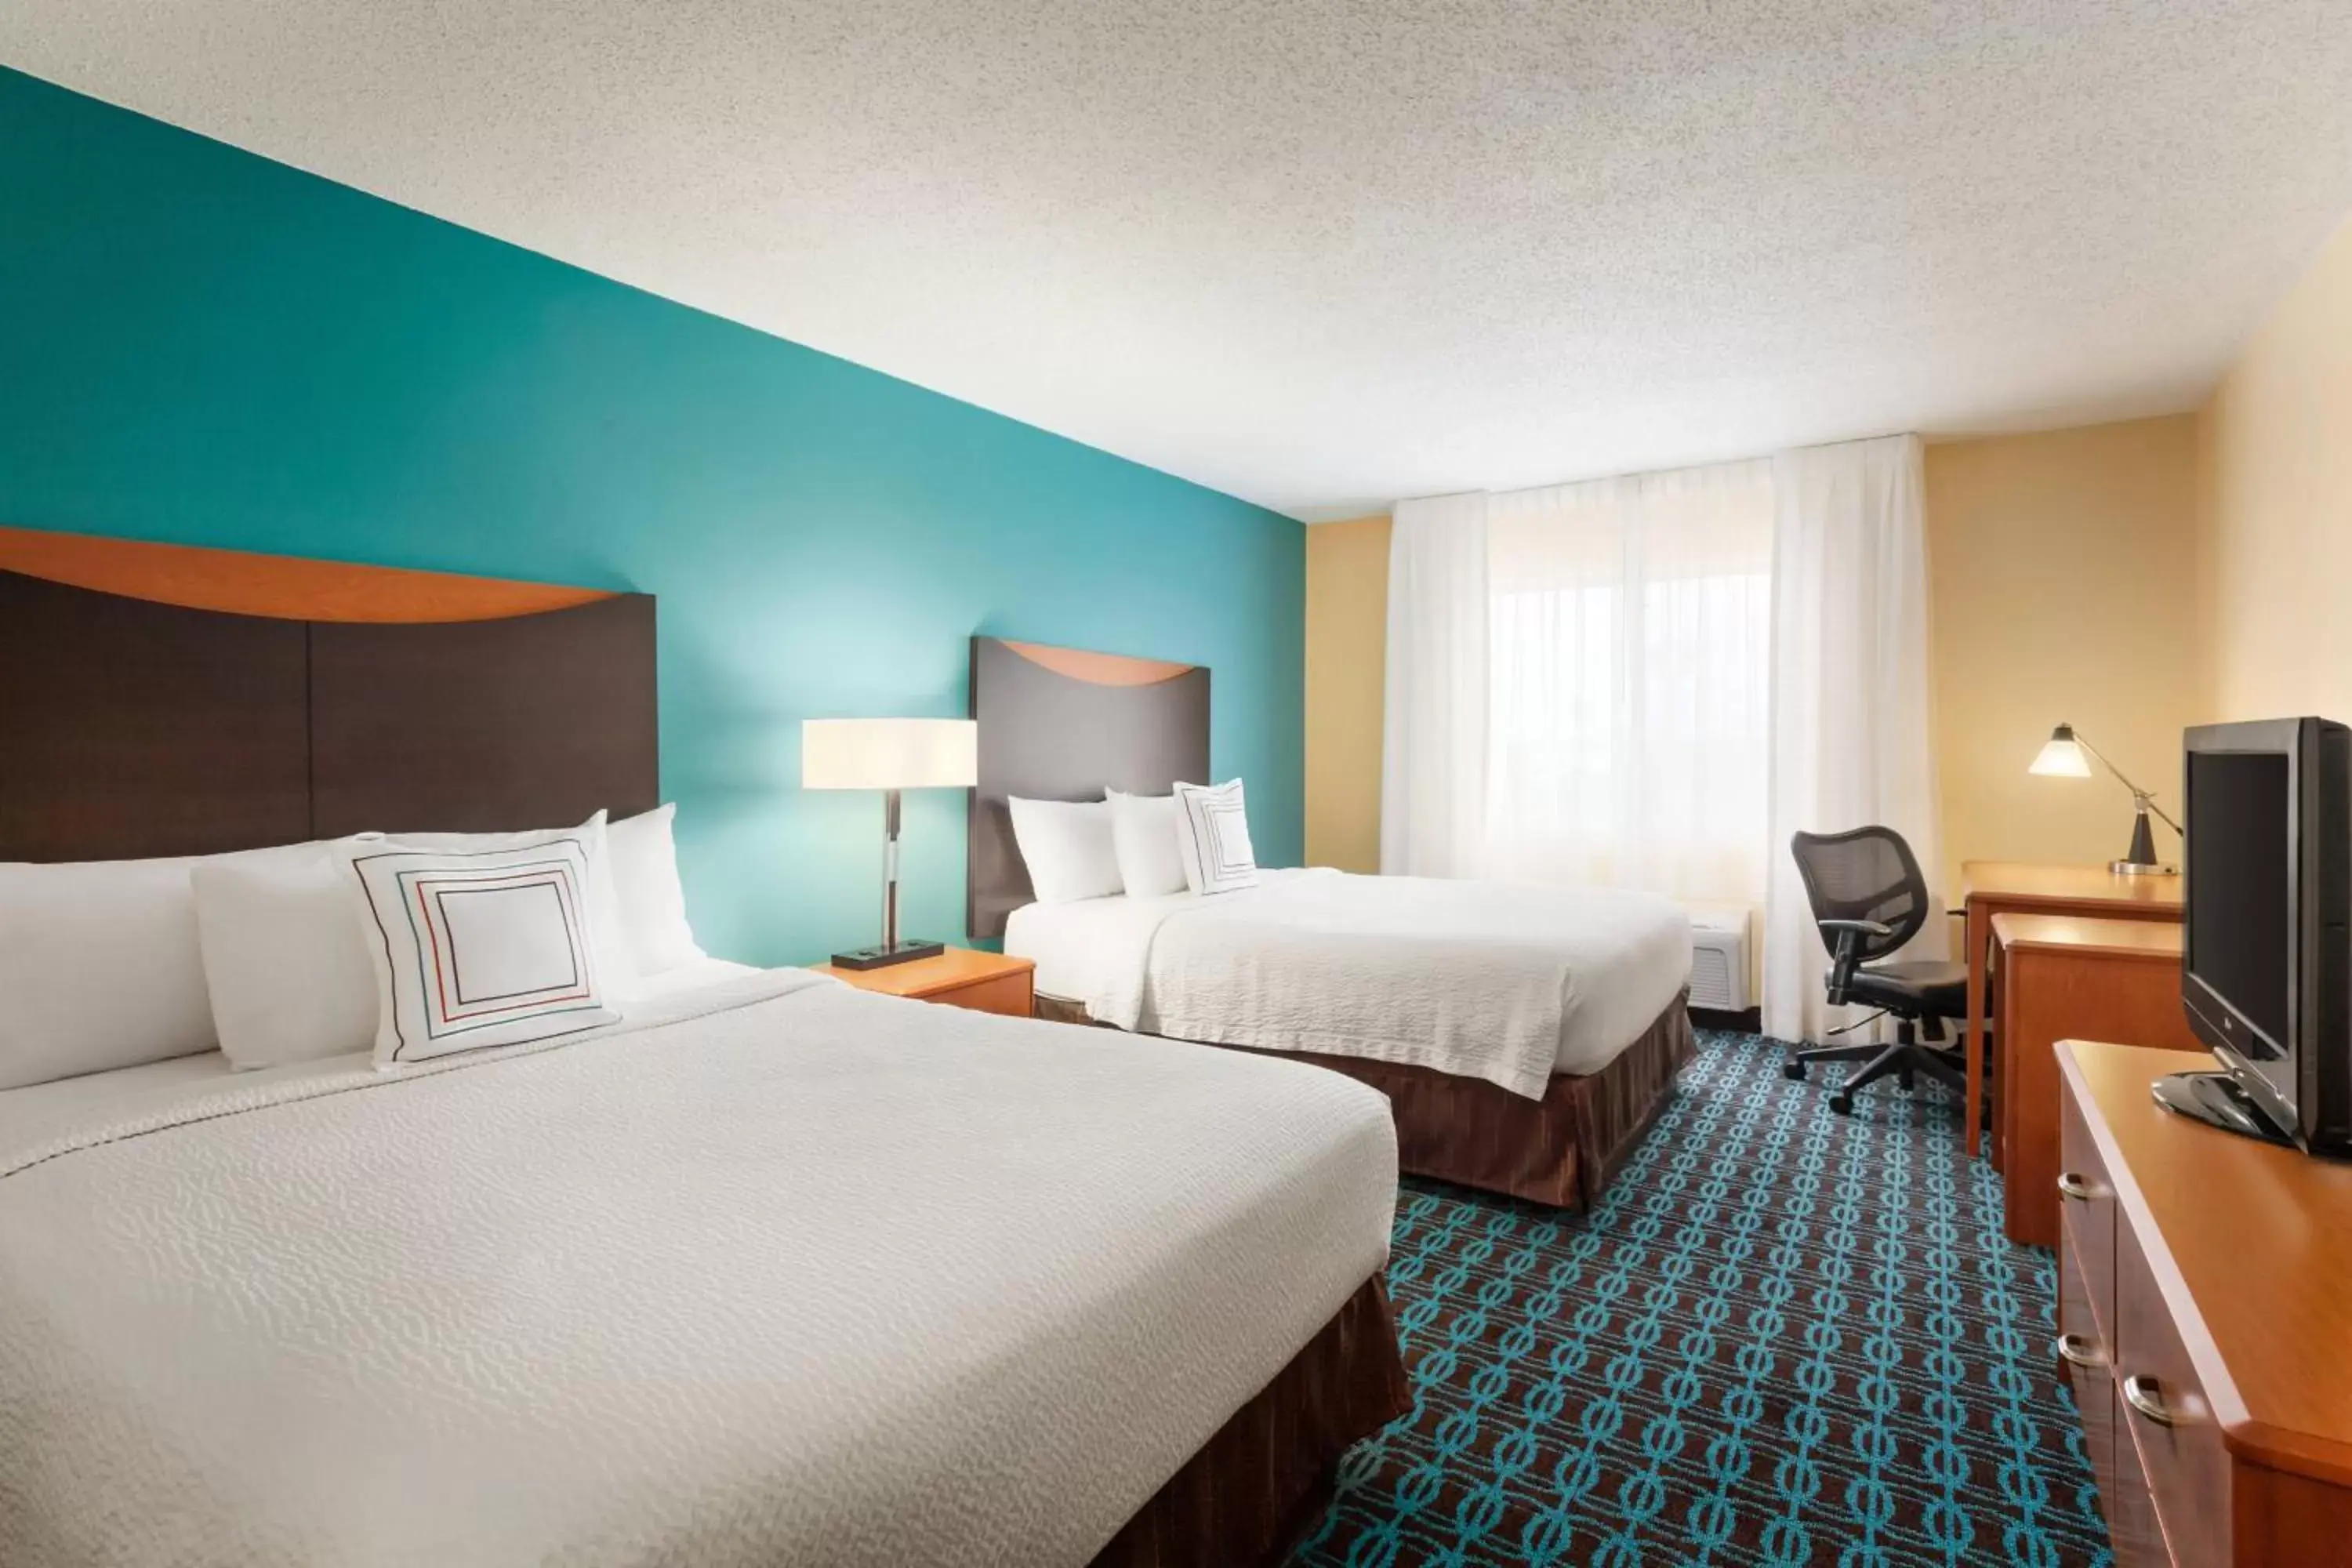 Queen Room with Two Queen Beds in Fairfield Inn & Suites Omaha East/Council Bluffs, IA